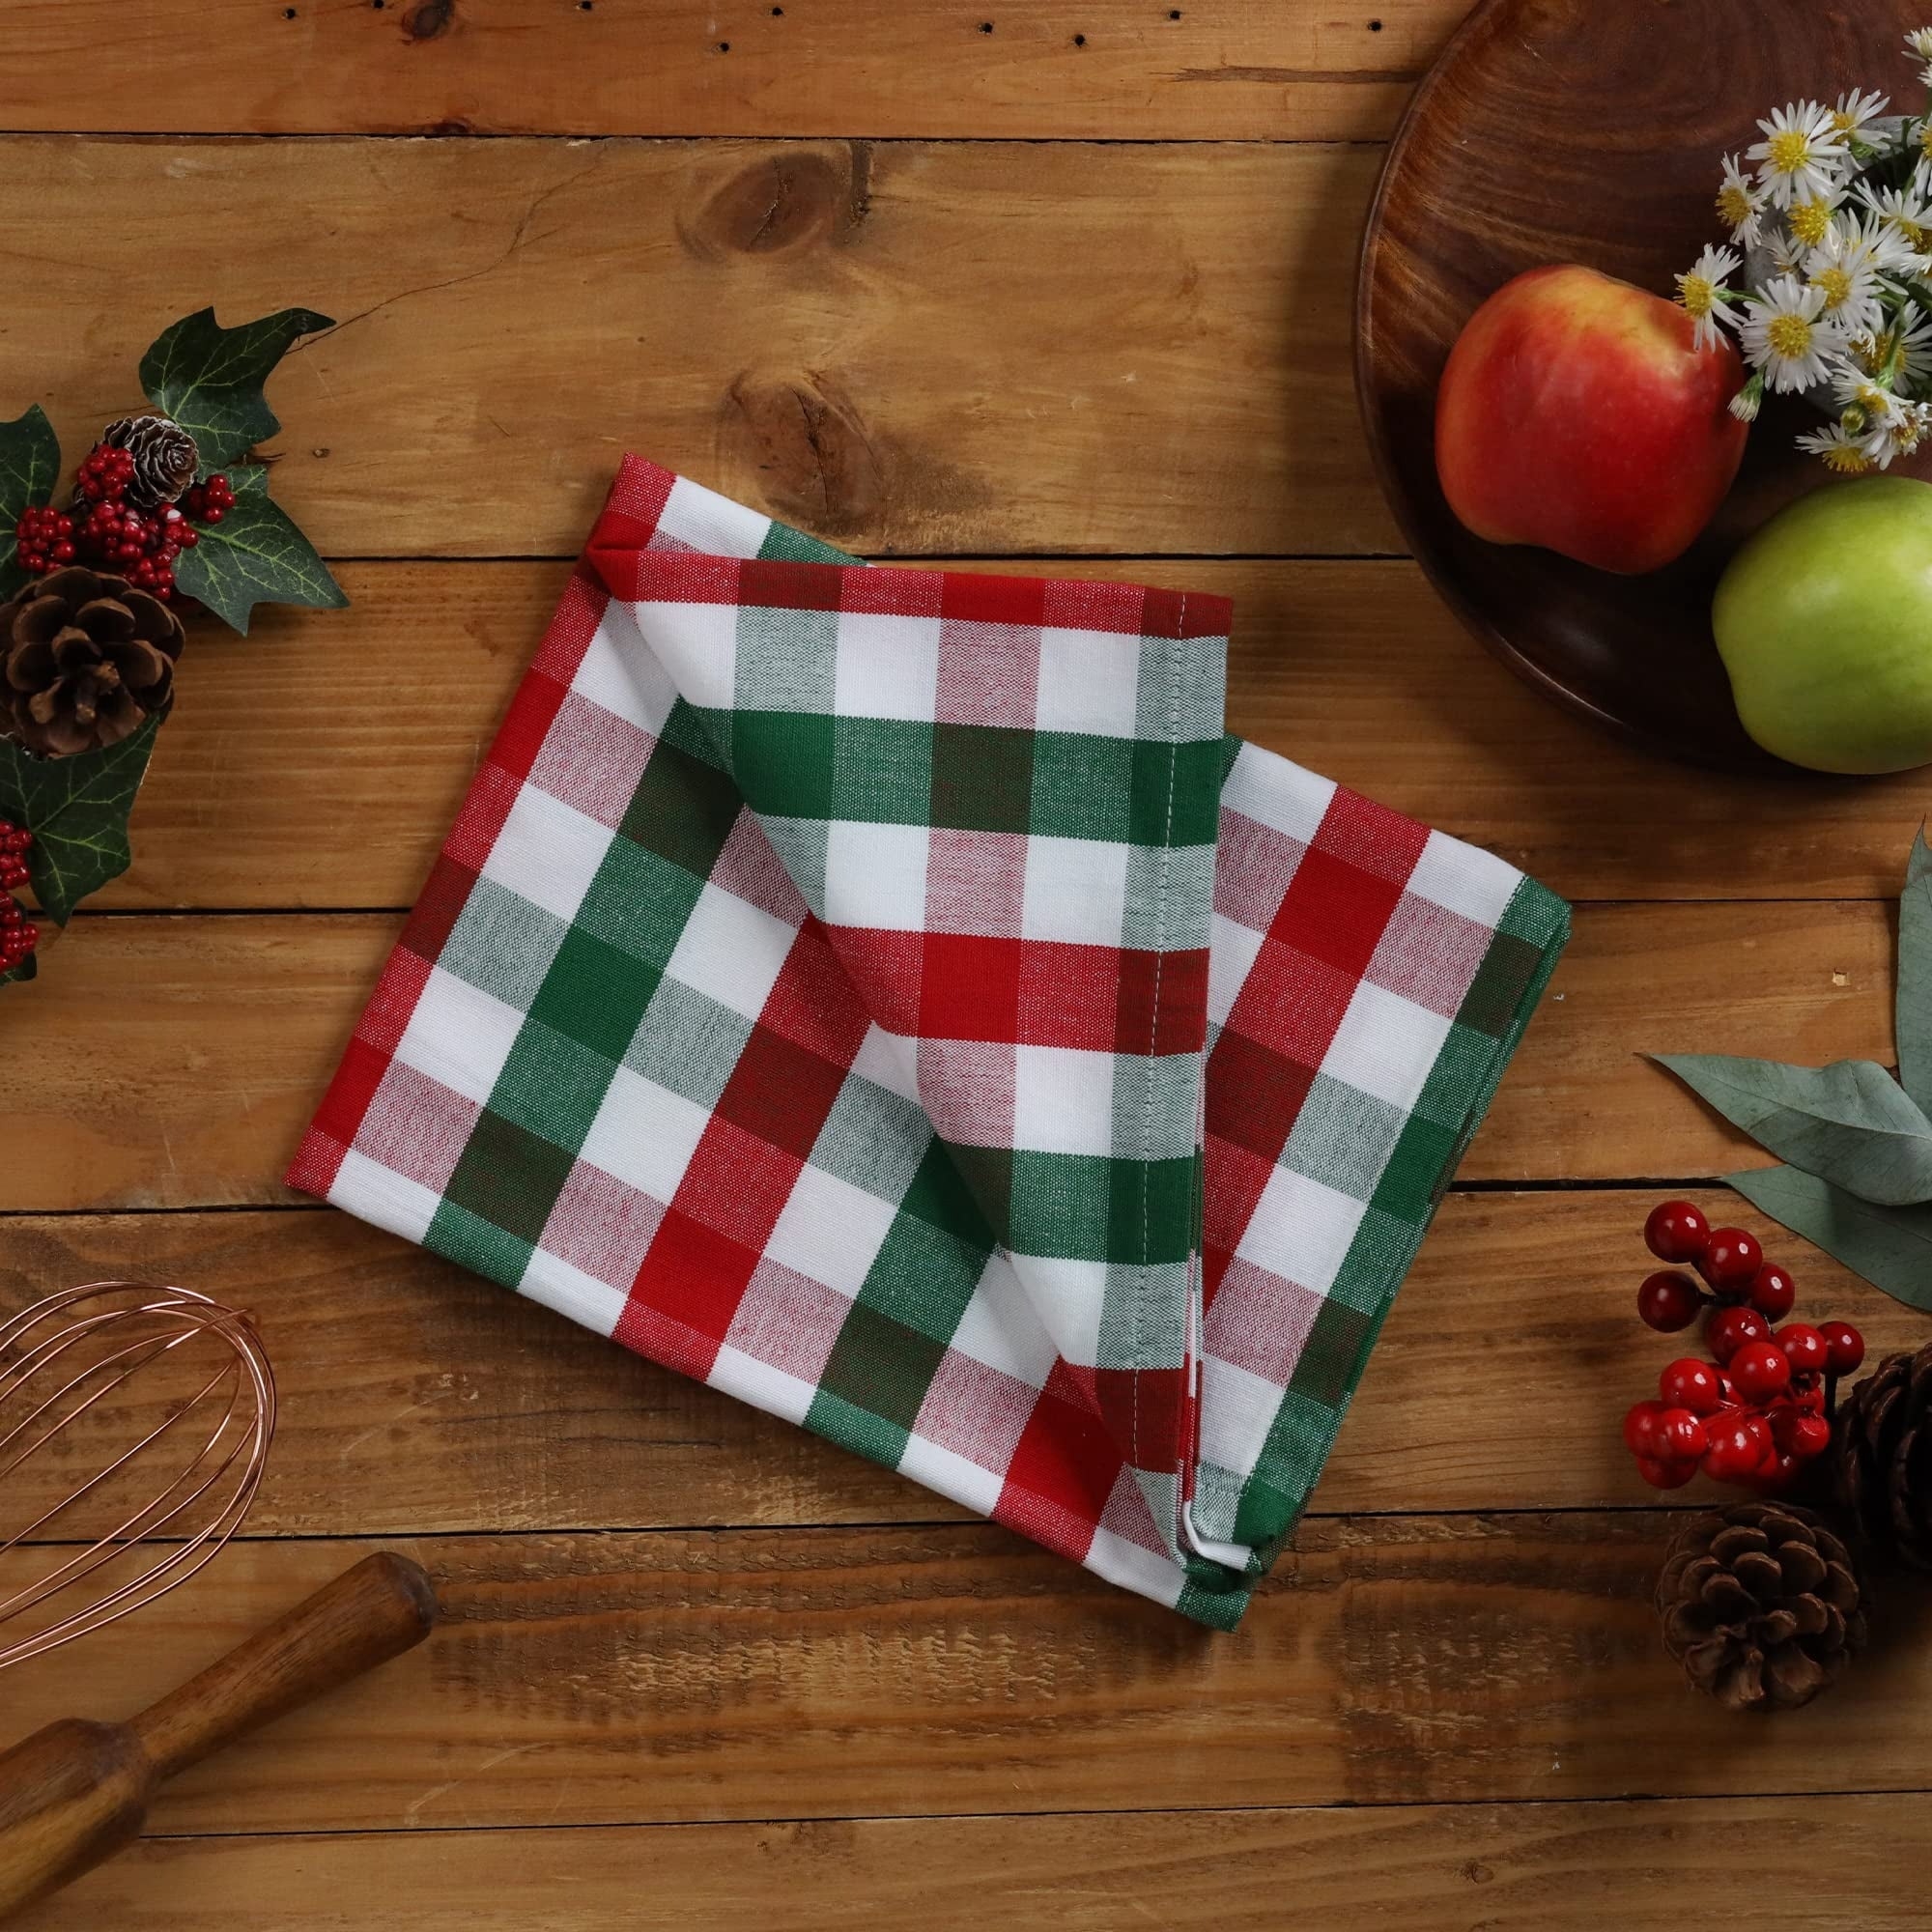 red and green plaid kitchen towel on table